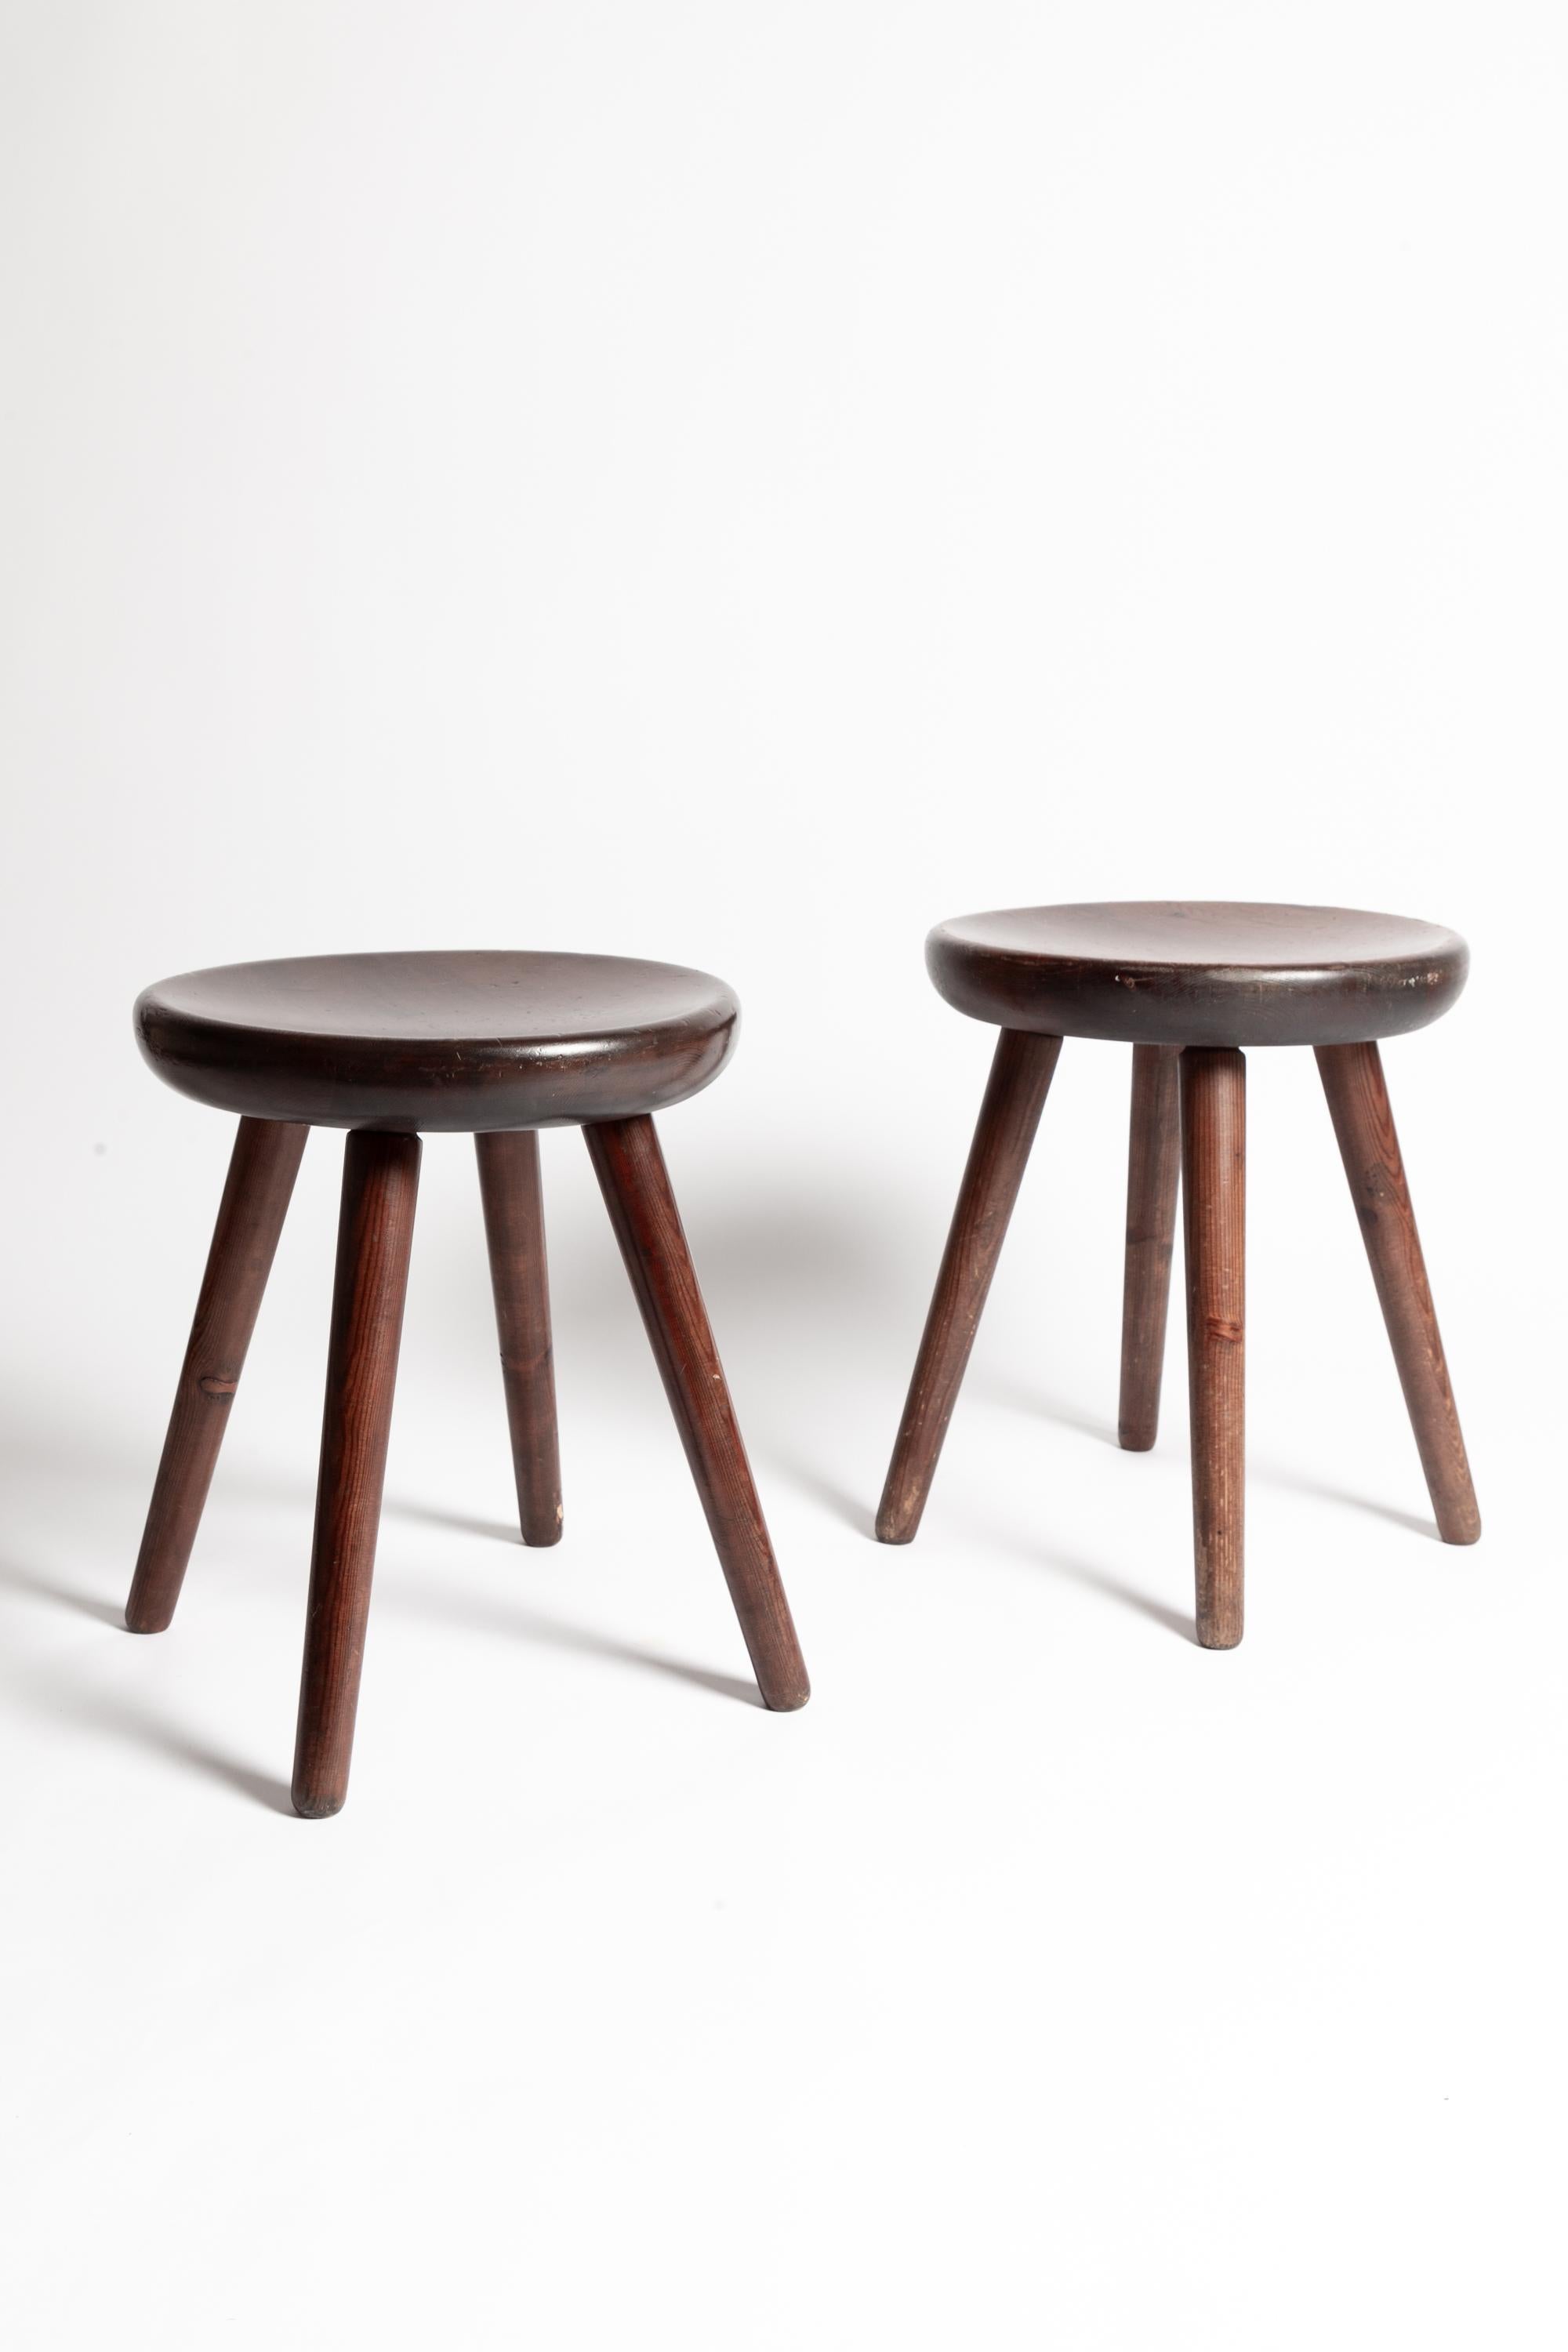 Pair of Four Legged pine stools attributed to Charlotte Perriand for Les Arcs

A rare pair of four-legged stools attributed Charlotte Perriand for Les Arcs.

In original condition with some marks, chips and scuffs commensurate with age and use.